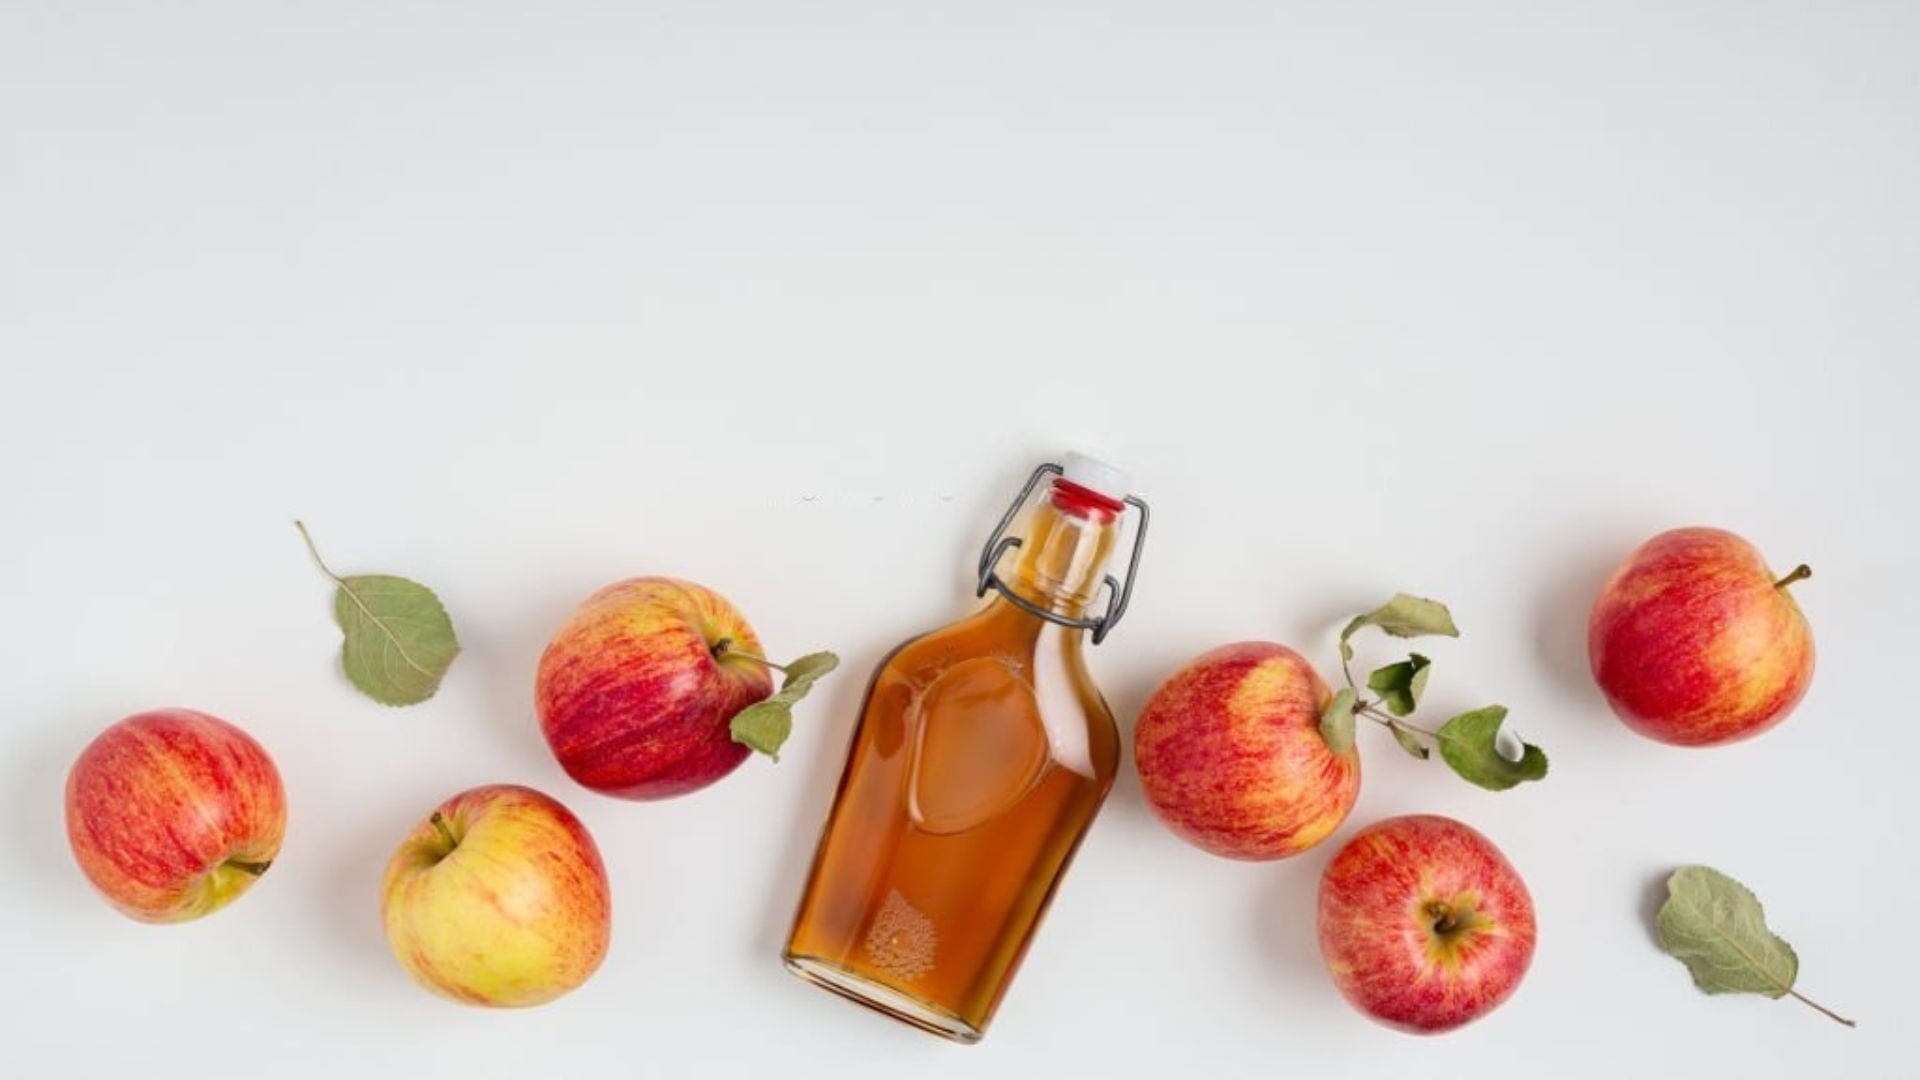 A Healthy Way to Shed Pounds - Apple Cider Vinegar Diet!